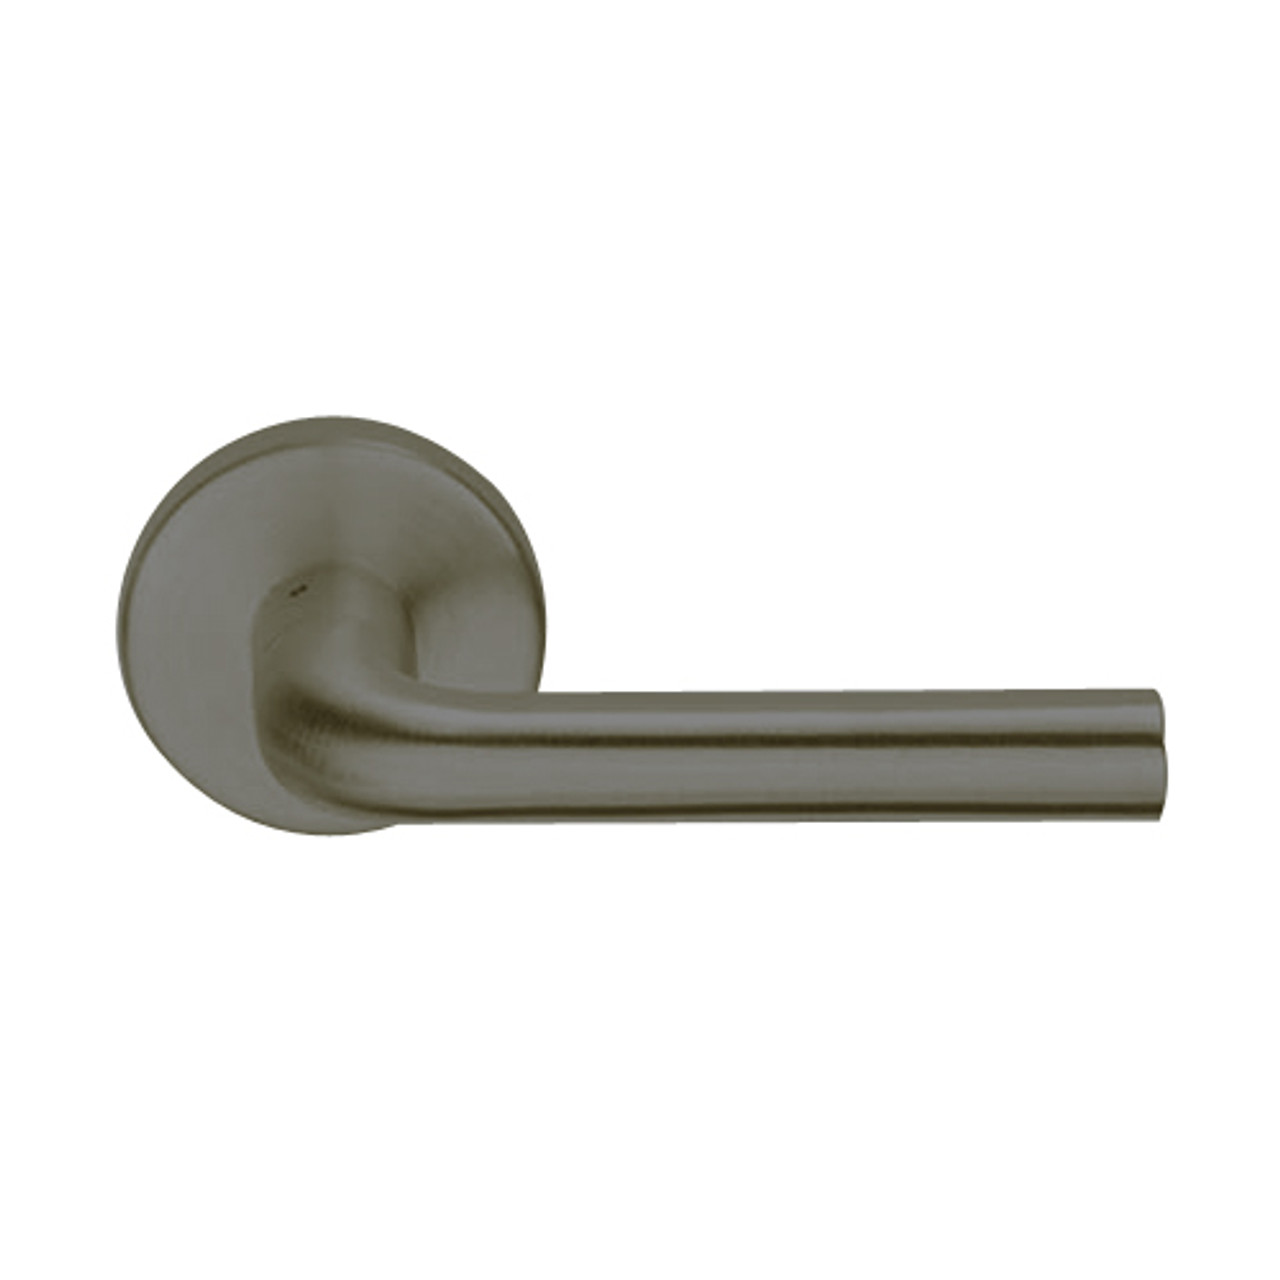 L9070R-02A-613 Schlage L Series Classroom Commercial Mortise Lock with 02 Cast Lever Design and Full Size Core in Oil Rubbed Bronze